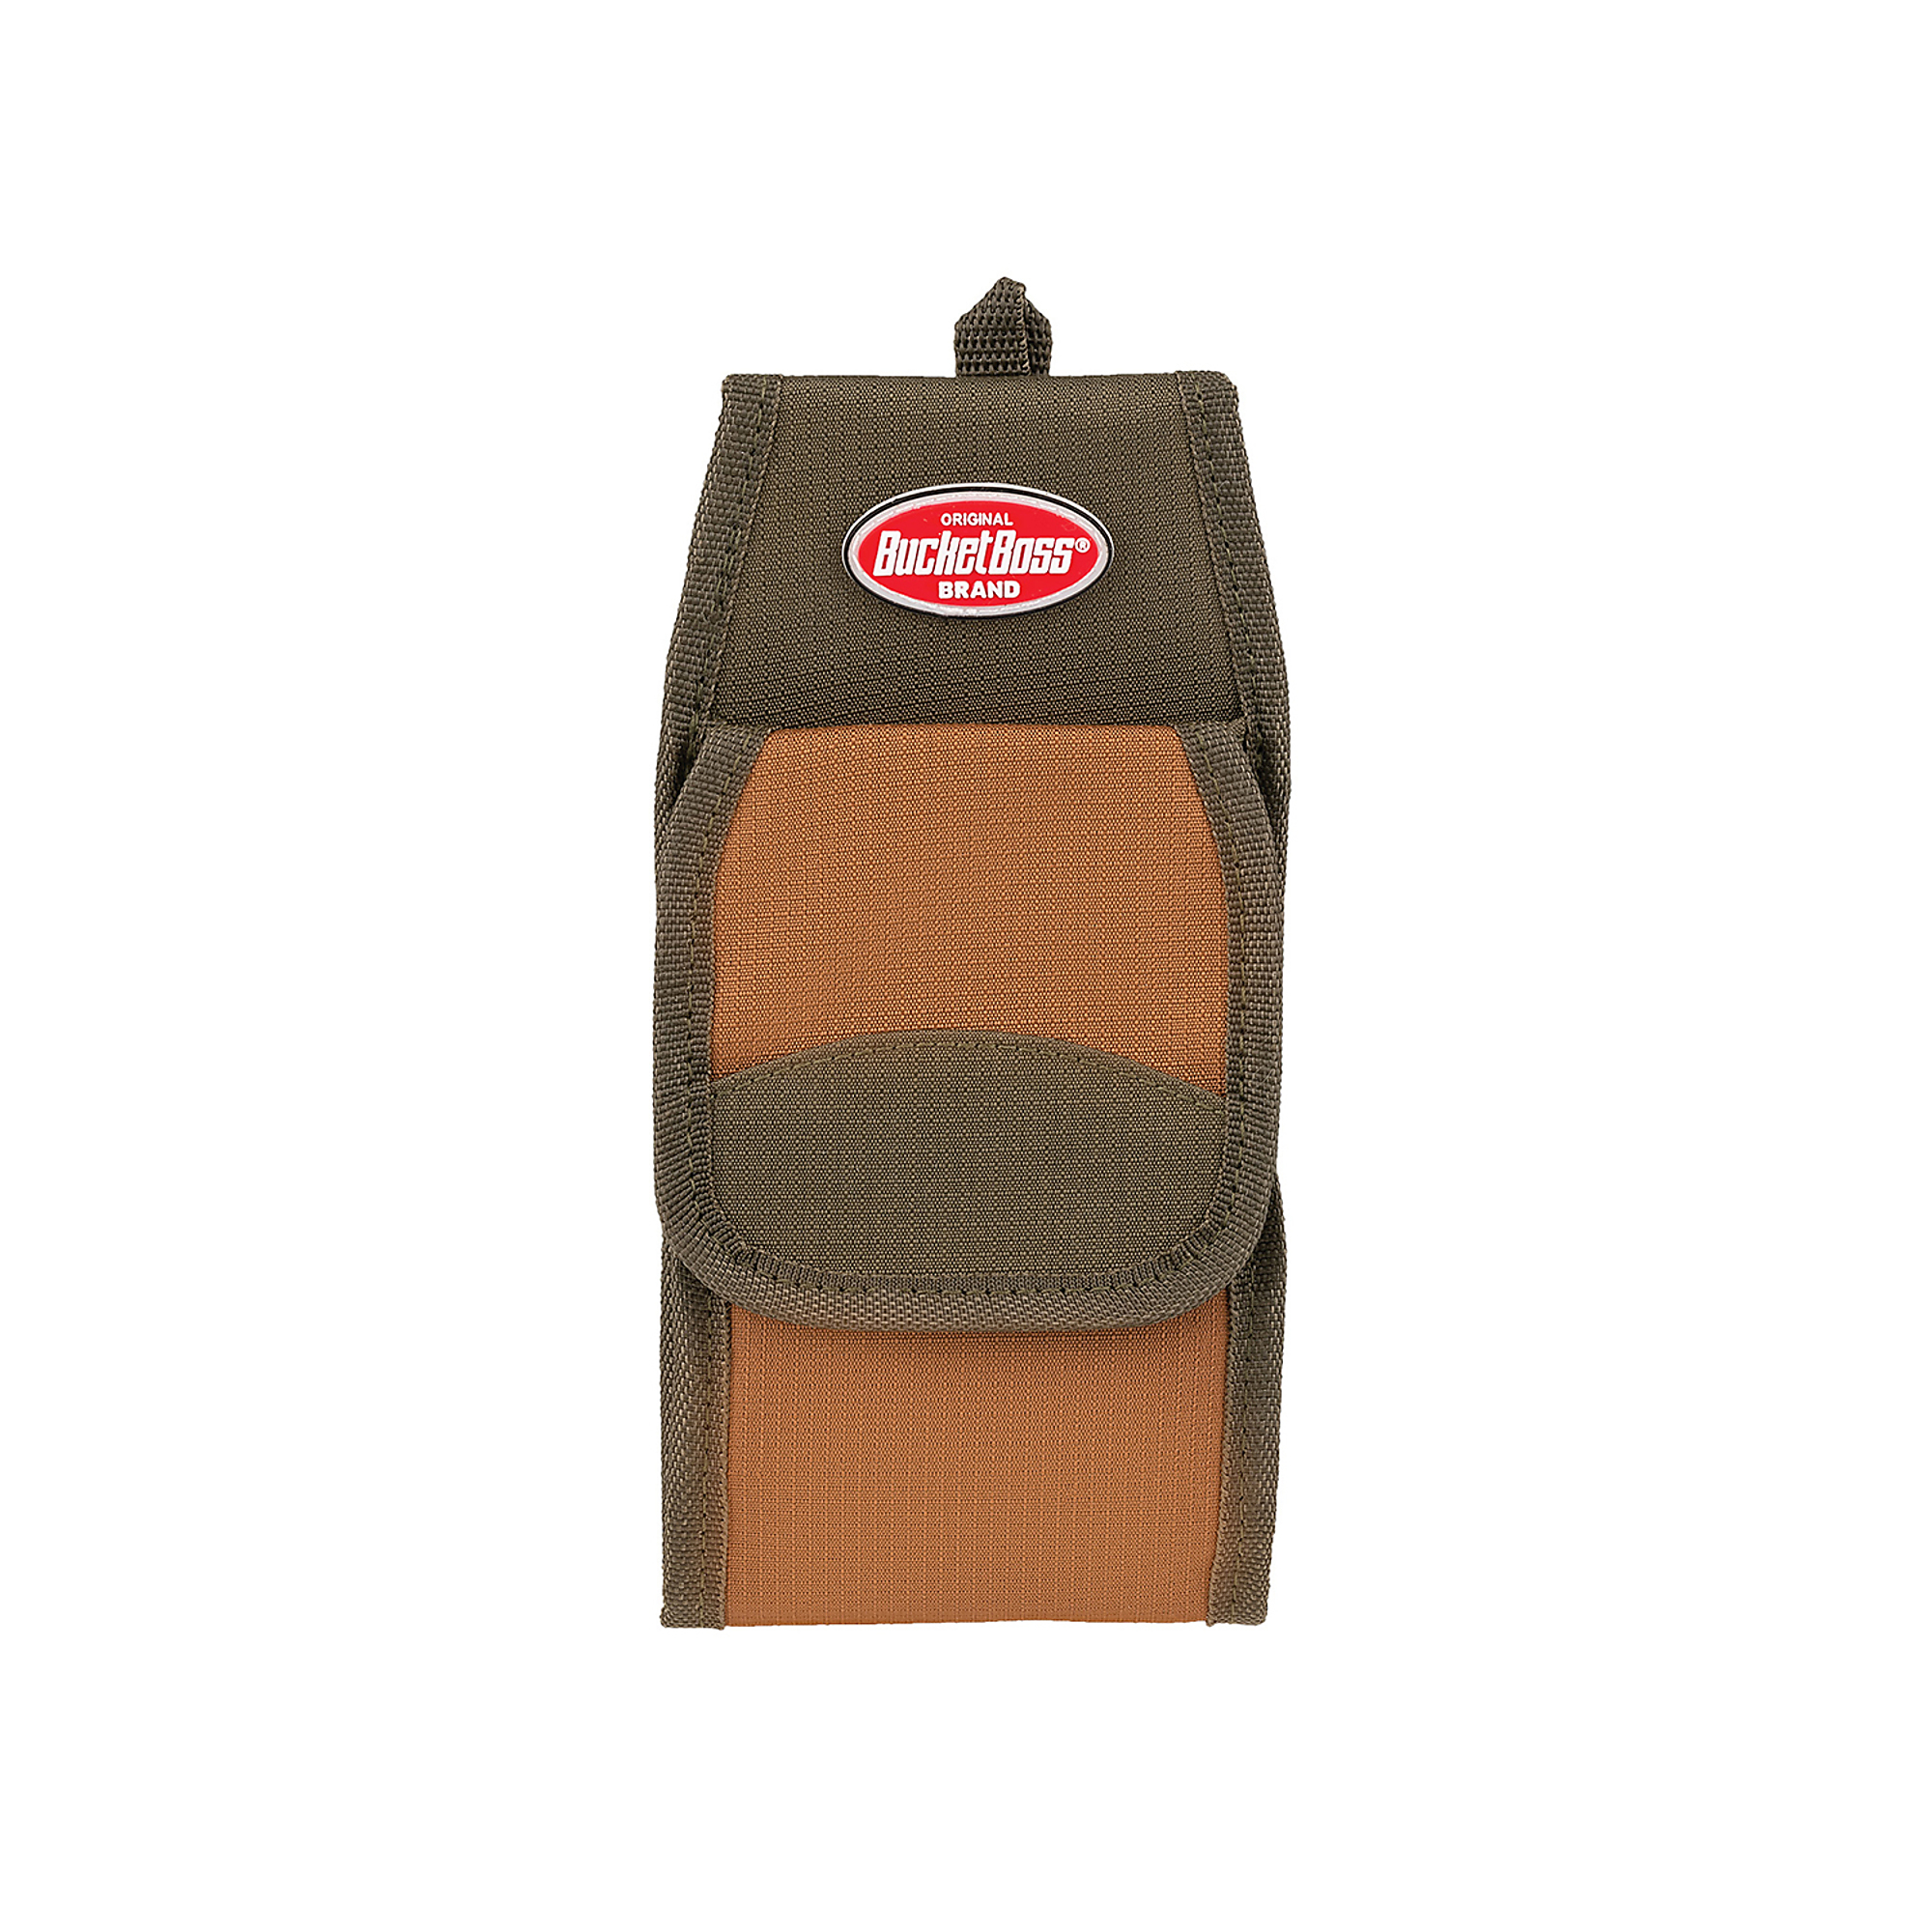 Bucket Boss, BIT KEEPER WITH FLAPFIT, Color Brown, Pockets (qty.) 12 Material Poly, Model 54188